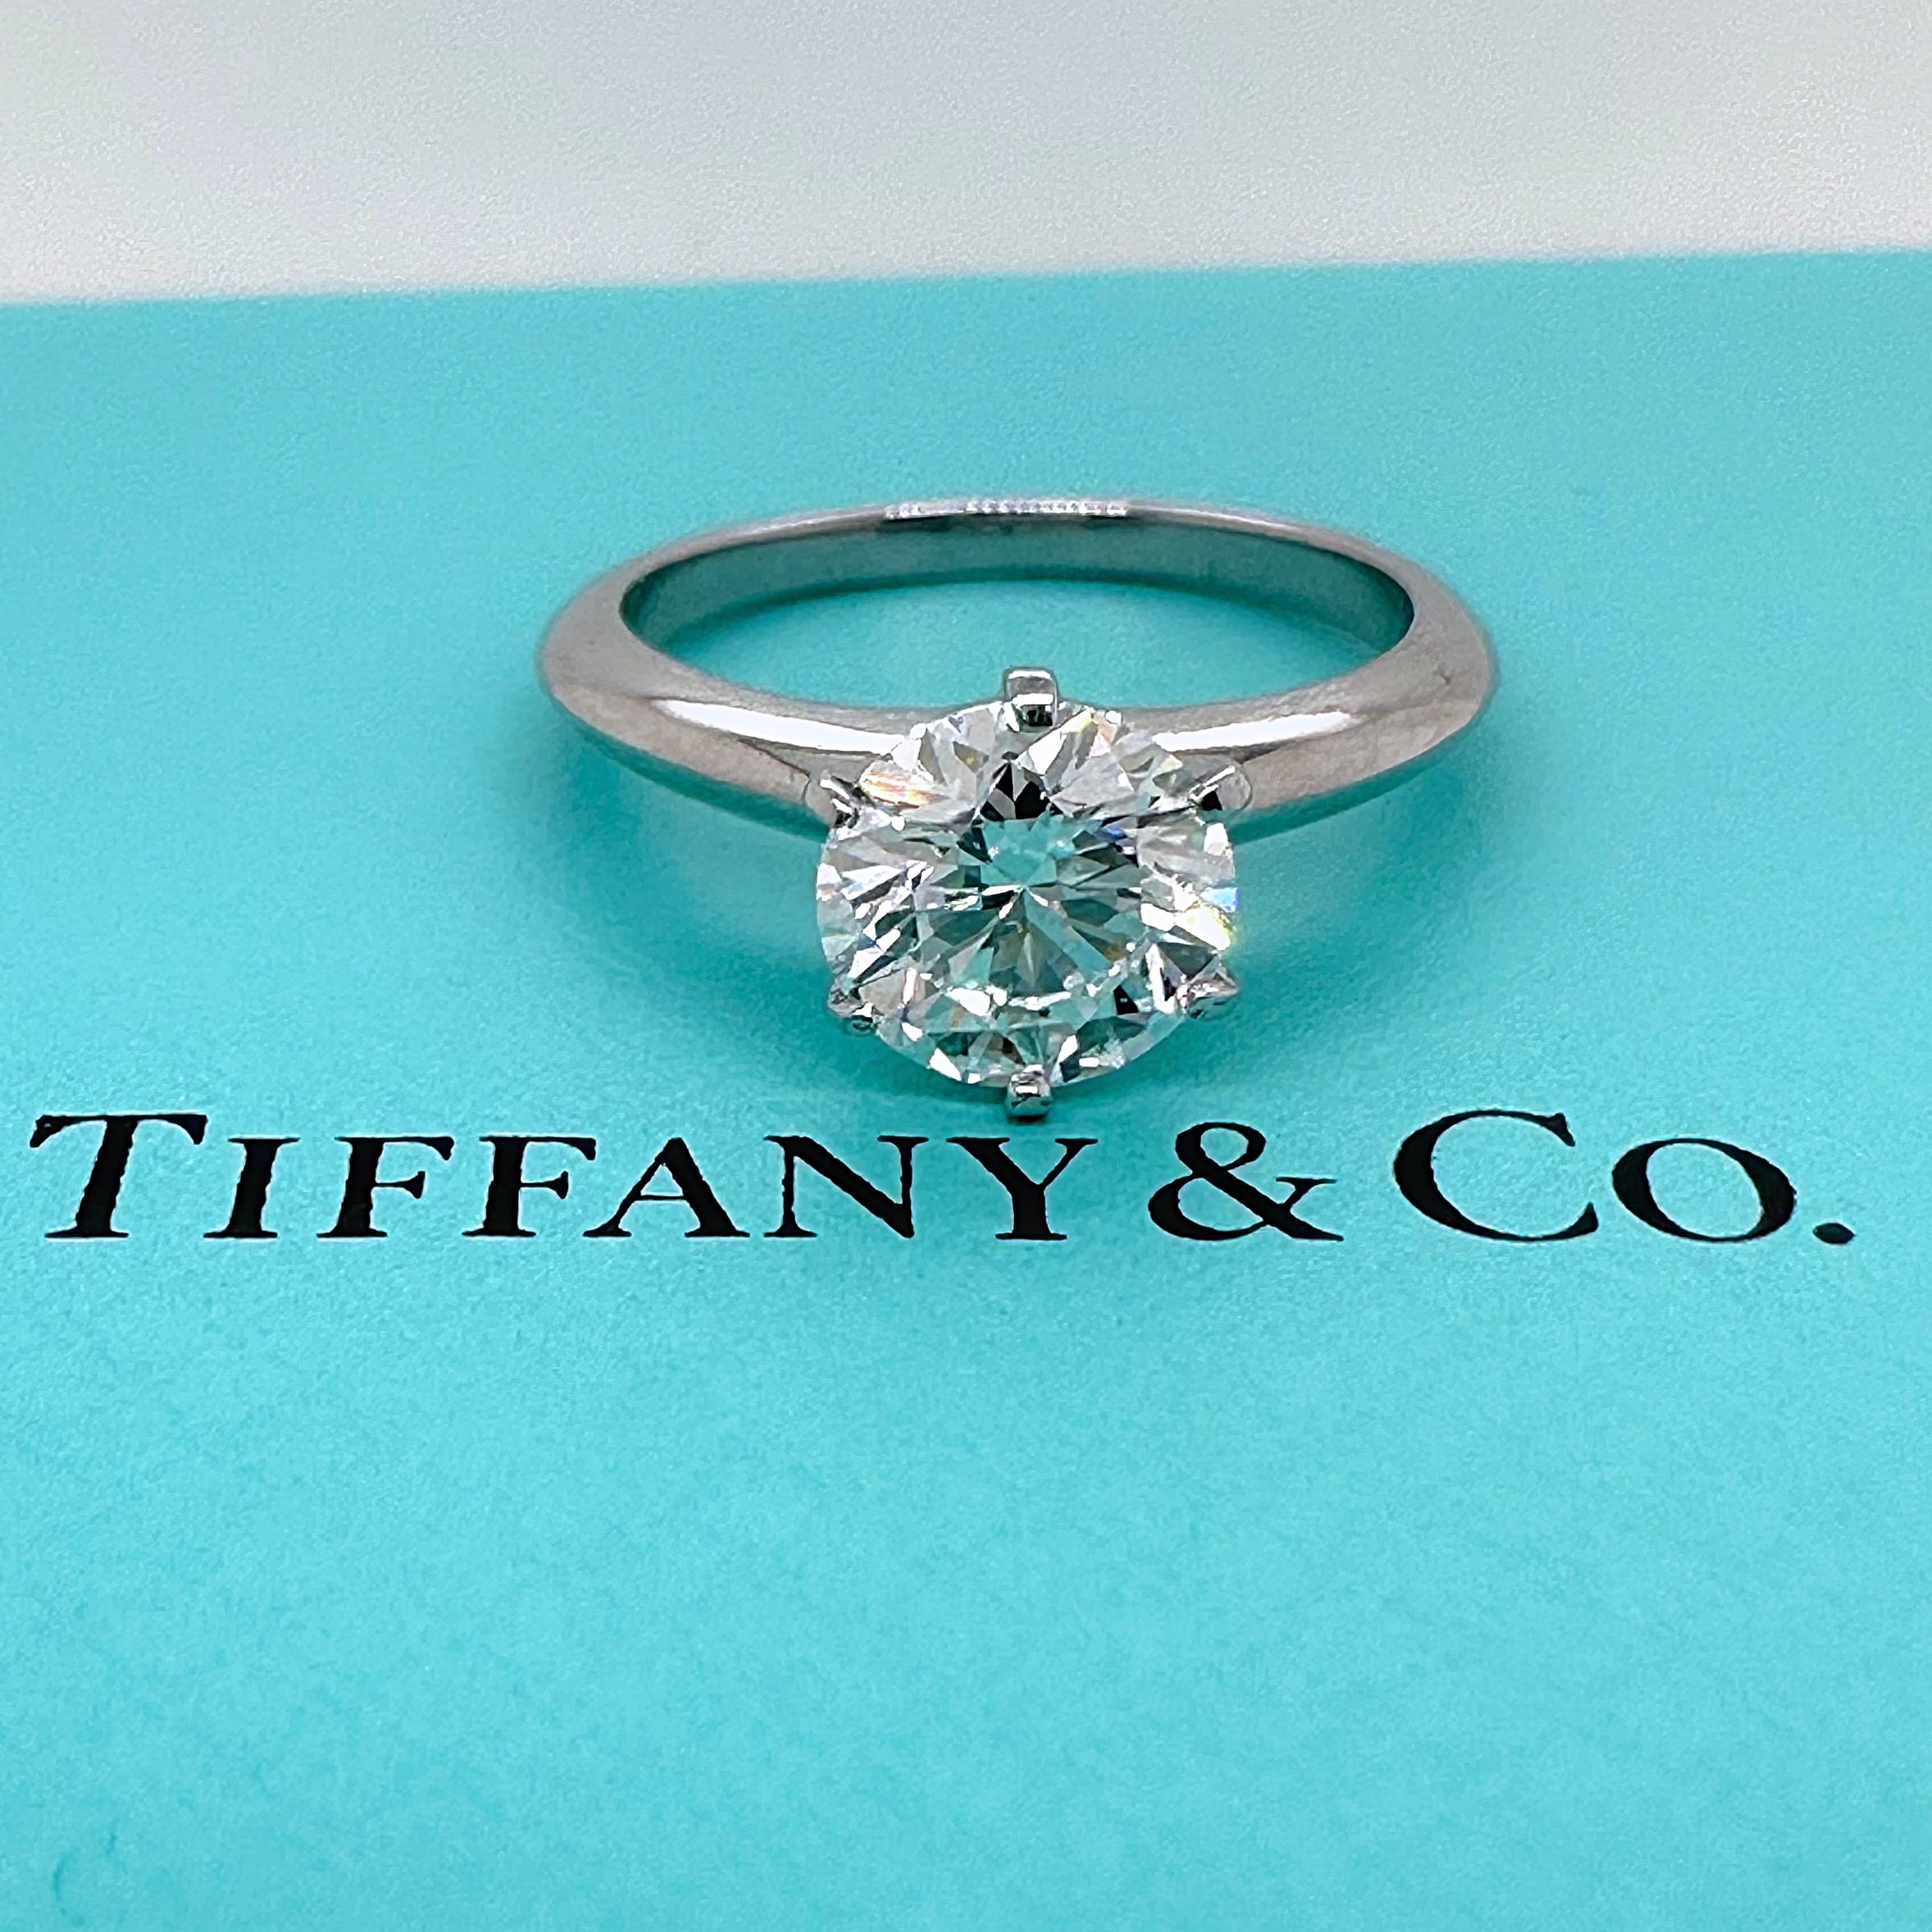 Tiffany & Co Round Diamond Solitaire 1.72 cts H VVS2 Plat Engagement Ring Papers For Sale 6